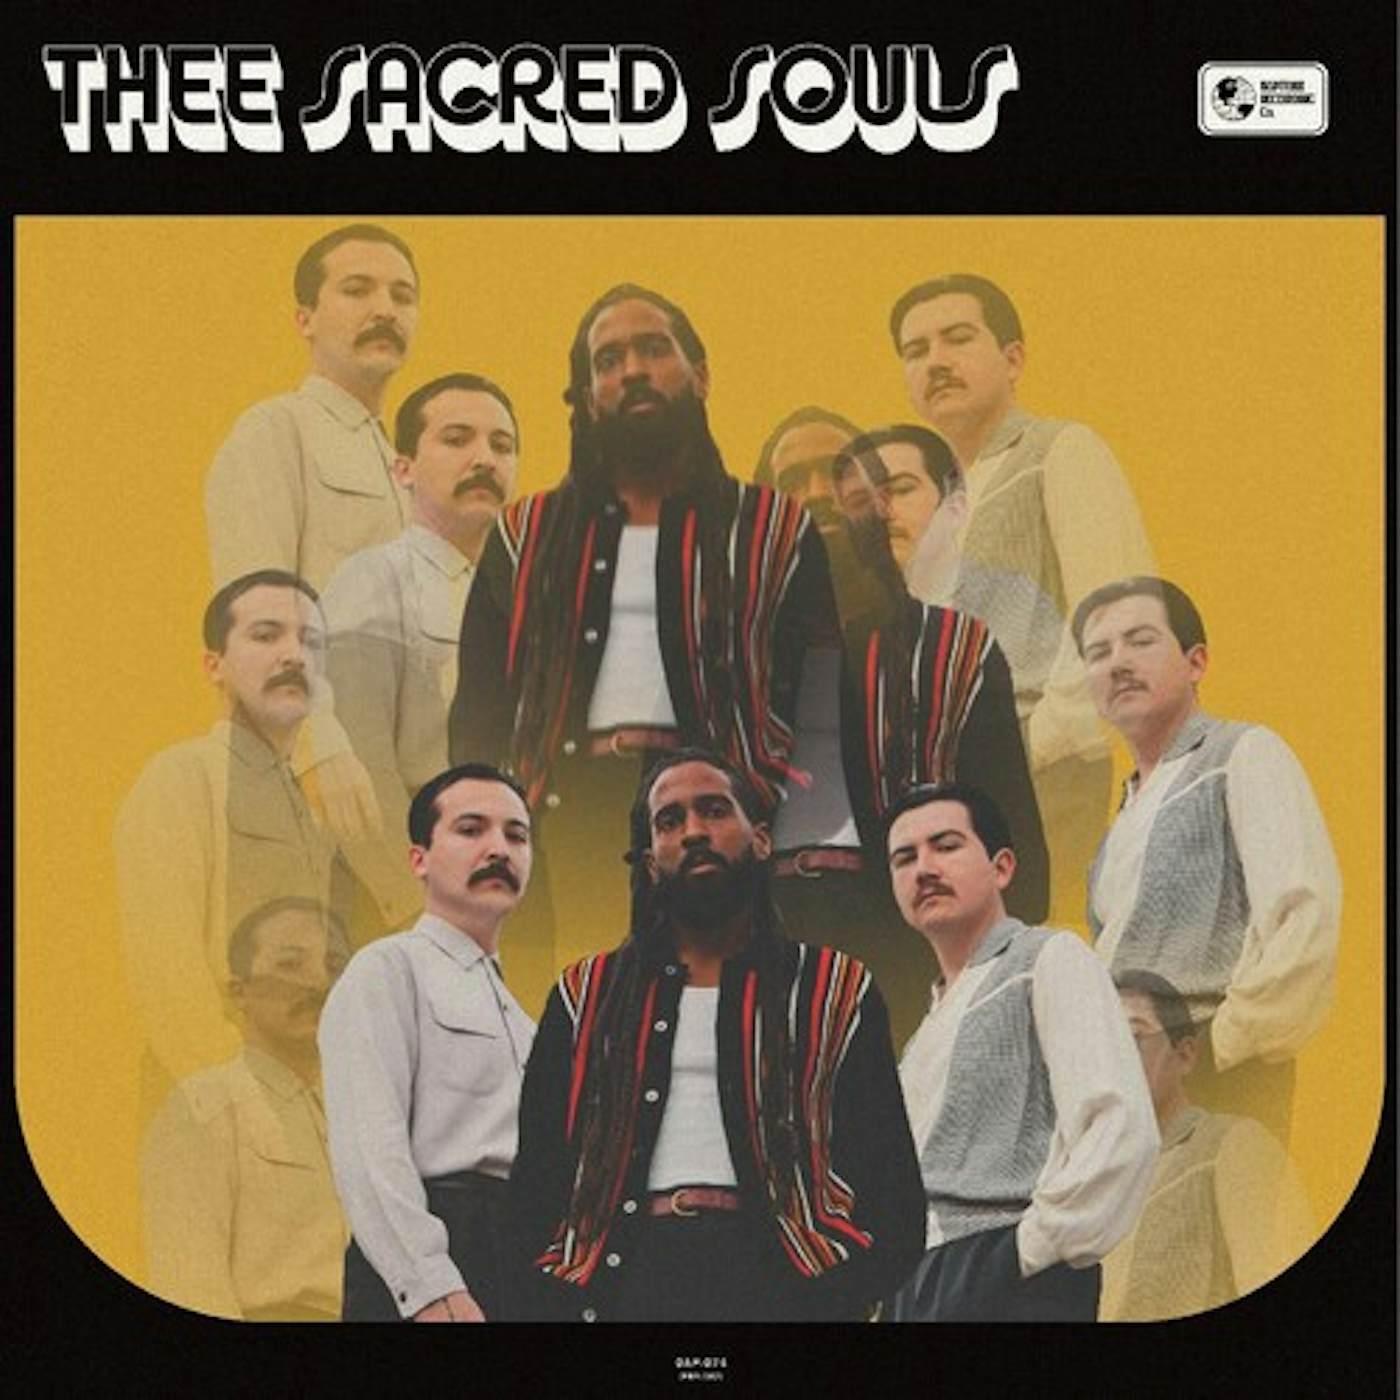 Thee Sacred Souls Vinyl Record